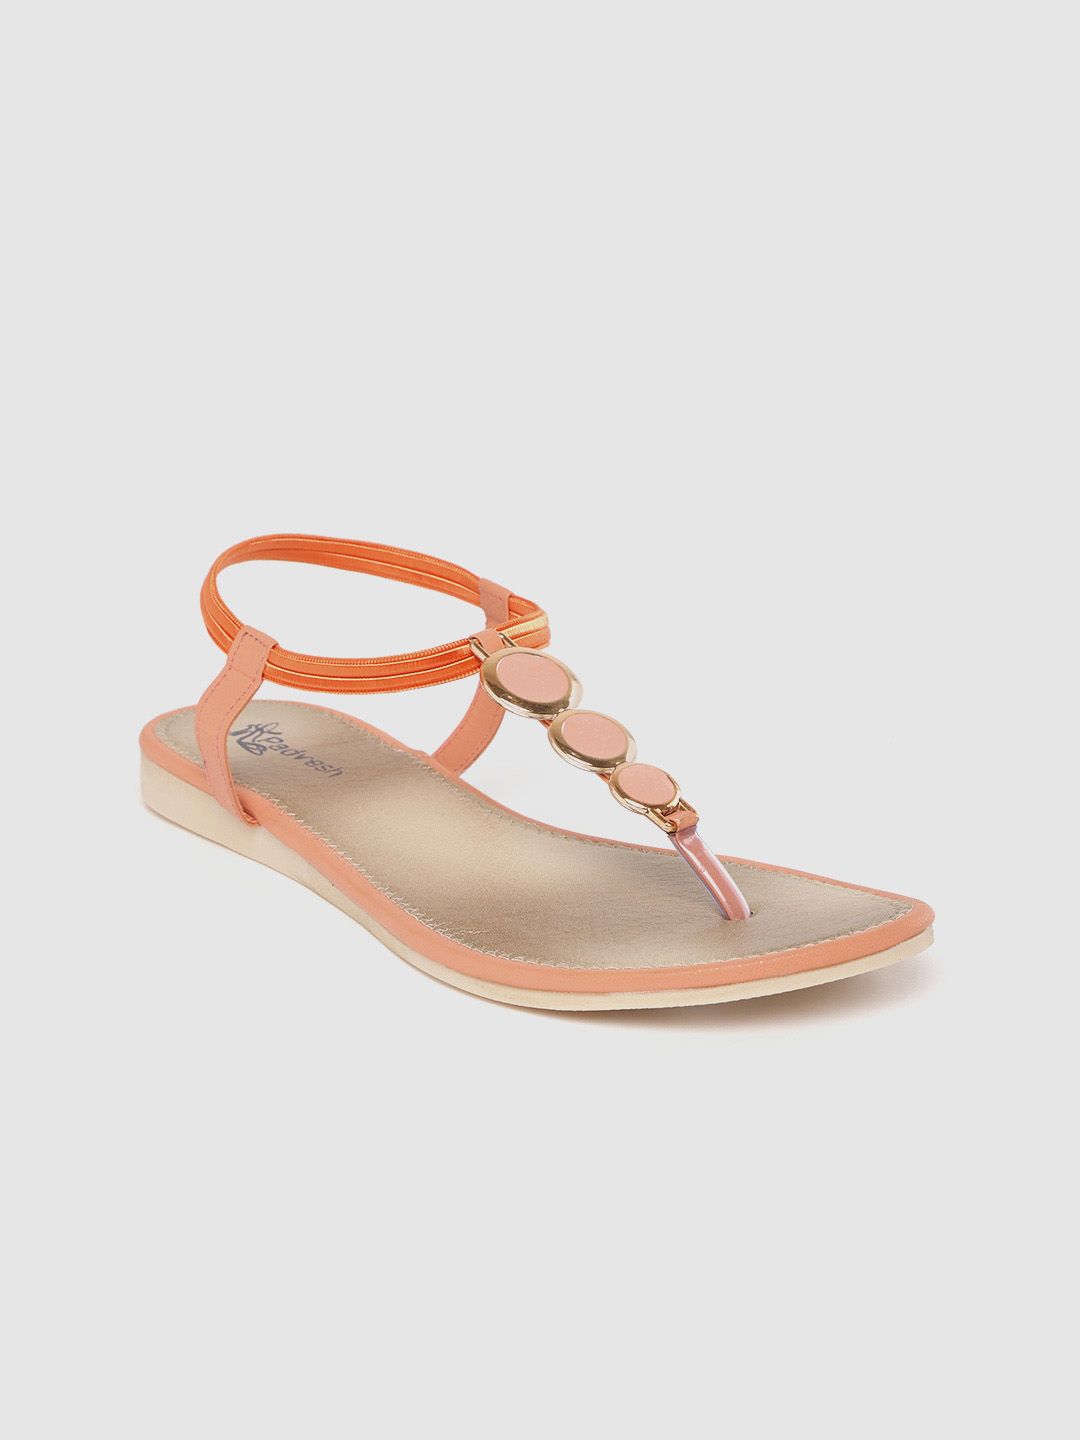 Padvesh Women Peach-Coloured & Gold-Toned Solid T-Strap Flats Price in India